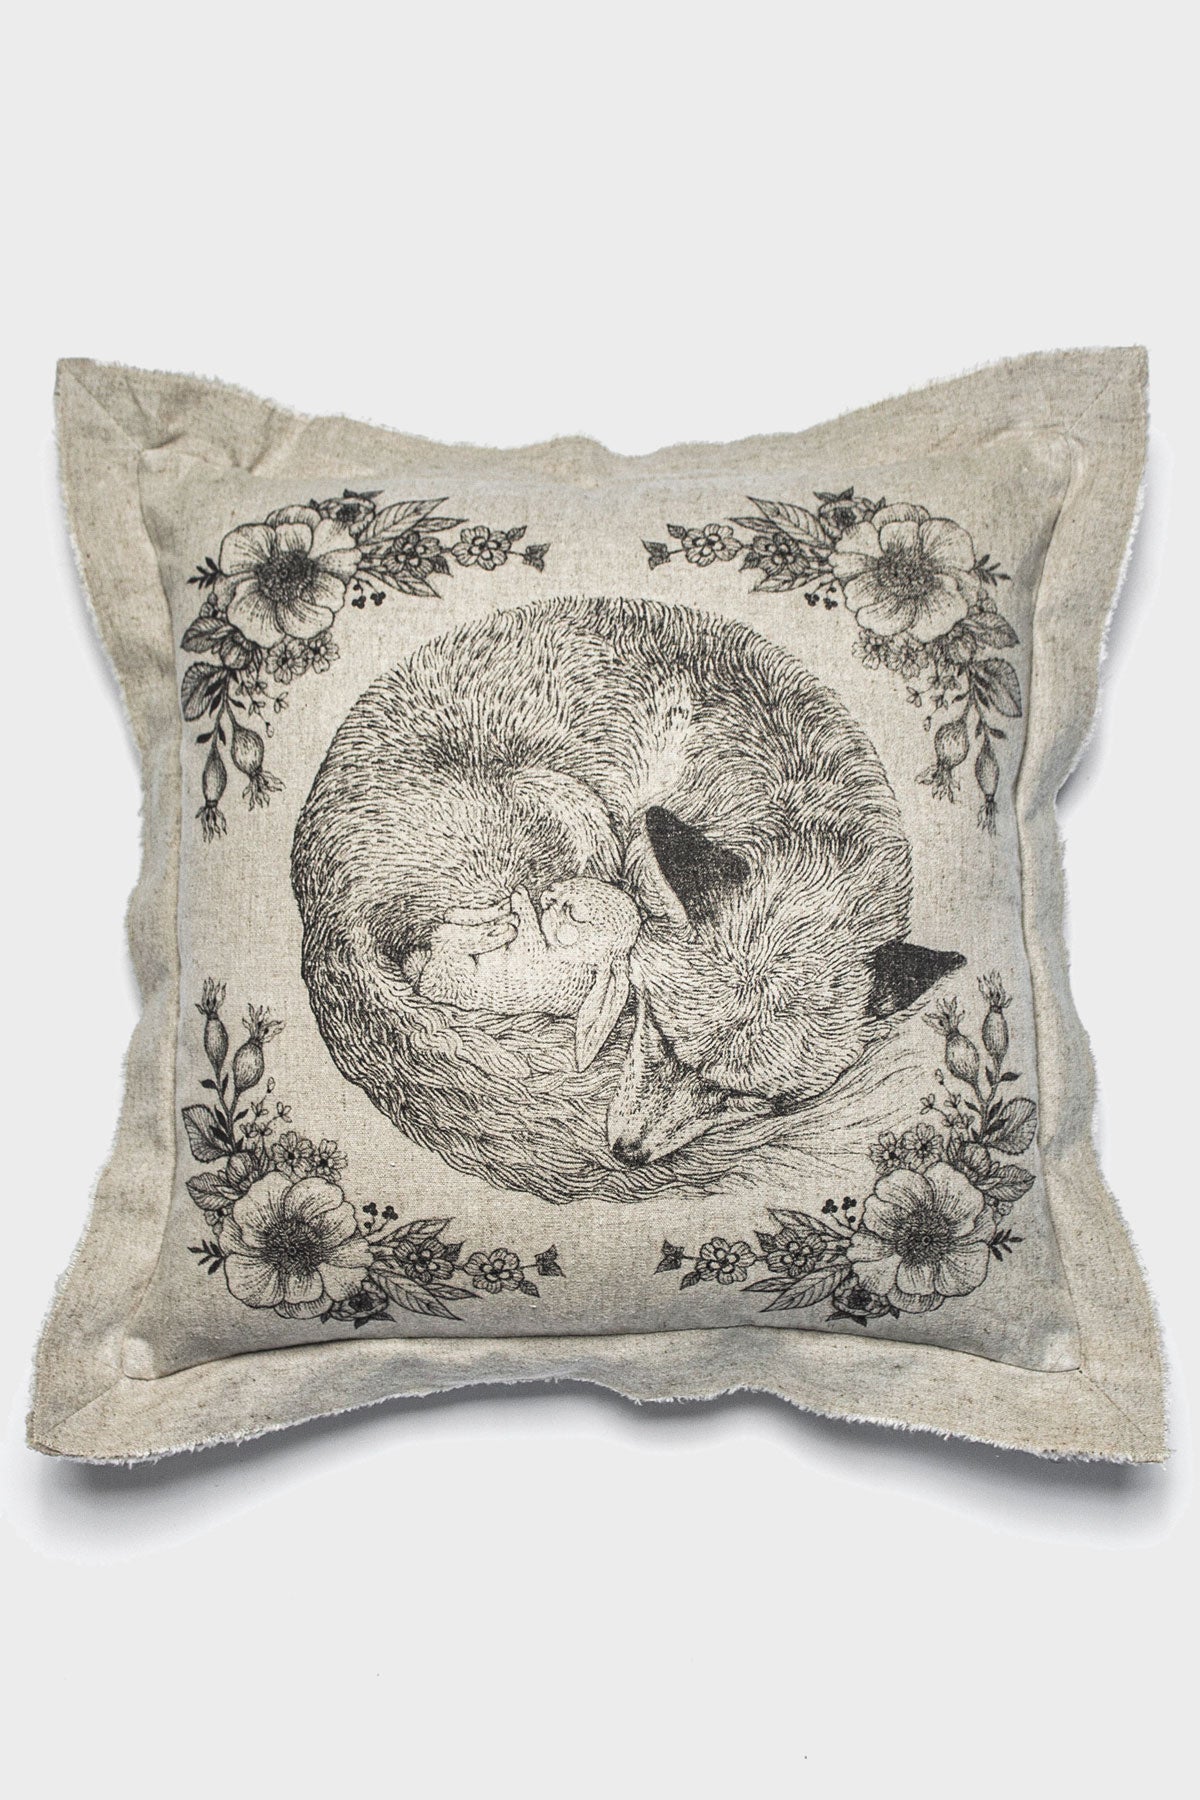  A linen cushion, hand made in Bali. This pillow is made from the off cuts of our BIG HUG Blanket. It features a raw-edge framed trim and a natural texture. It belongs anywhere you cuddle, a sofa, chaise, or bed. This pillow is illustrated by Suflanda features a fox lovingly taking care of a little rabbit. Perfect as a gift!